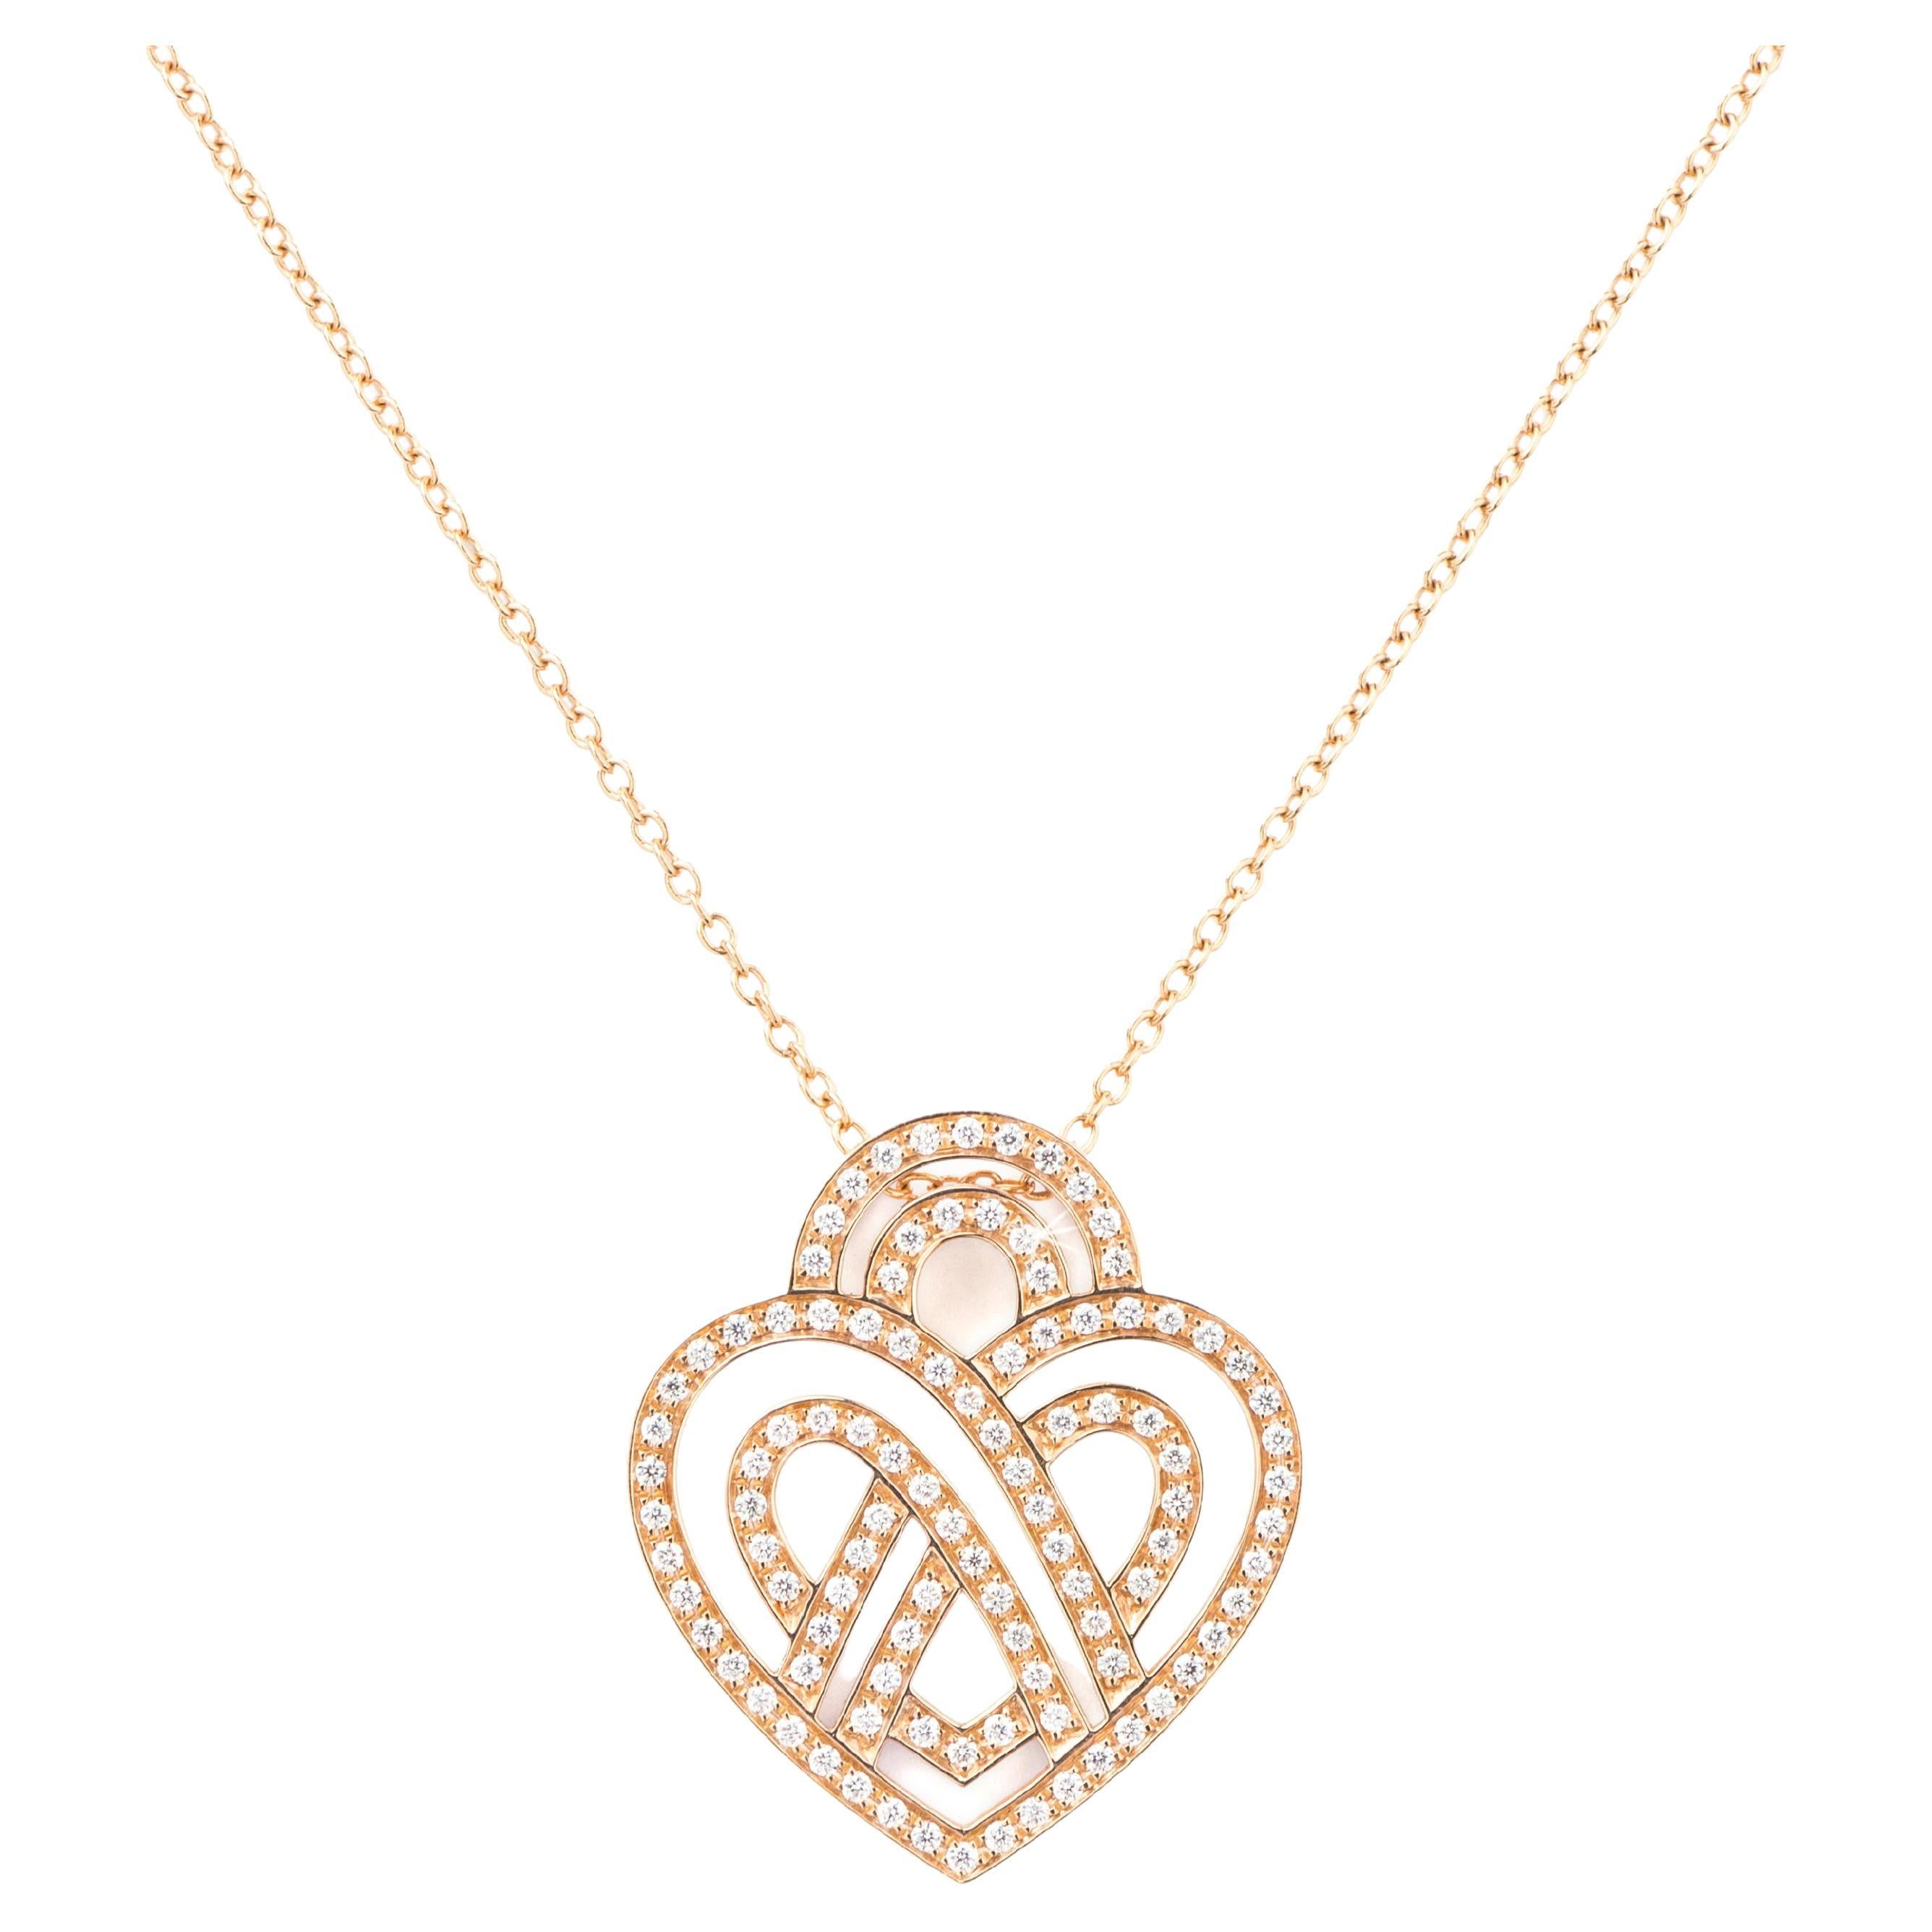 18 Carats Gold and Diamonds Necklace, Rose Gold, Coeur Entrelacé Collection For Sale